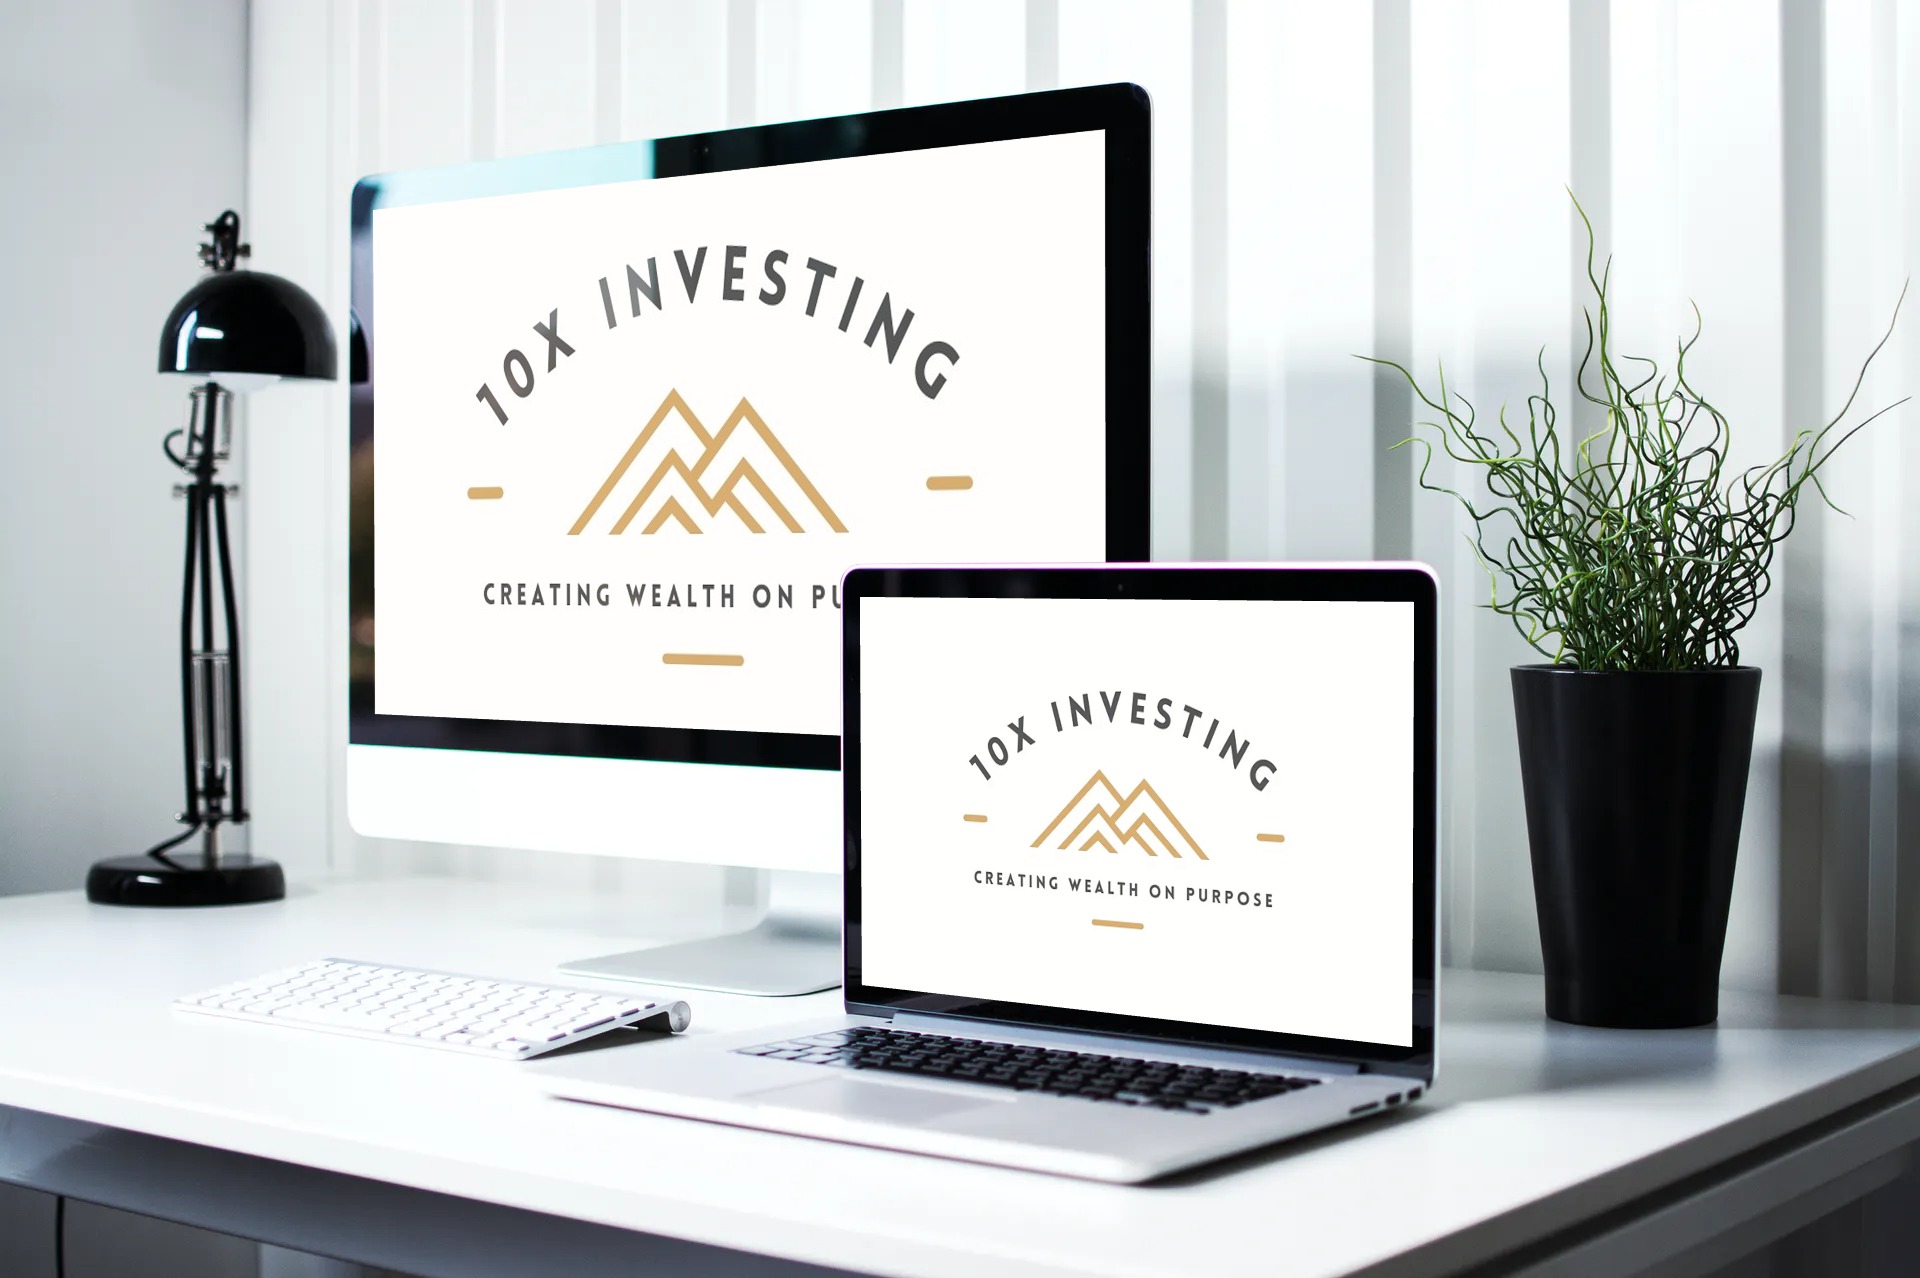 10x investing course